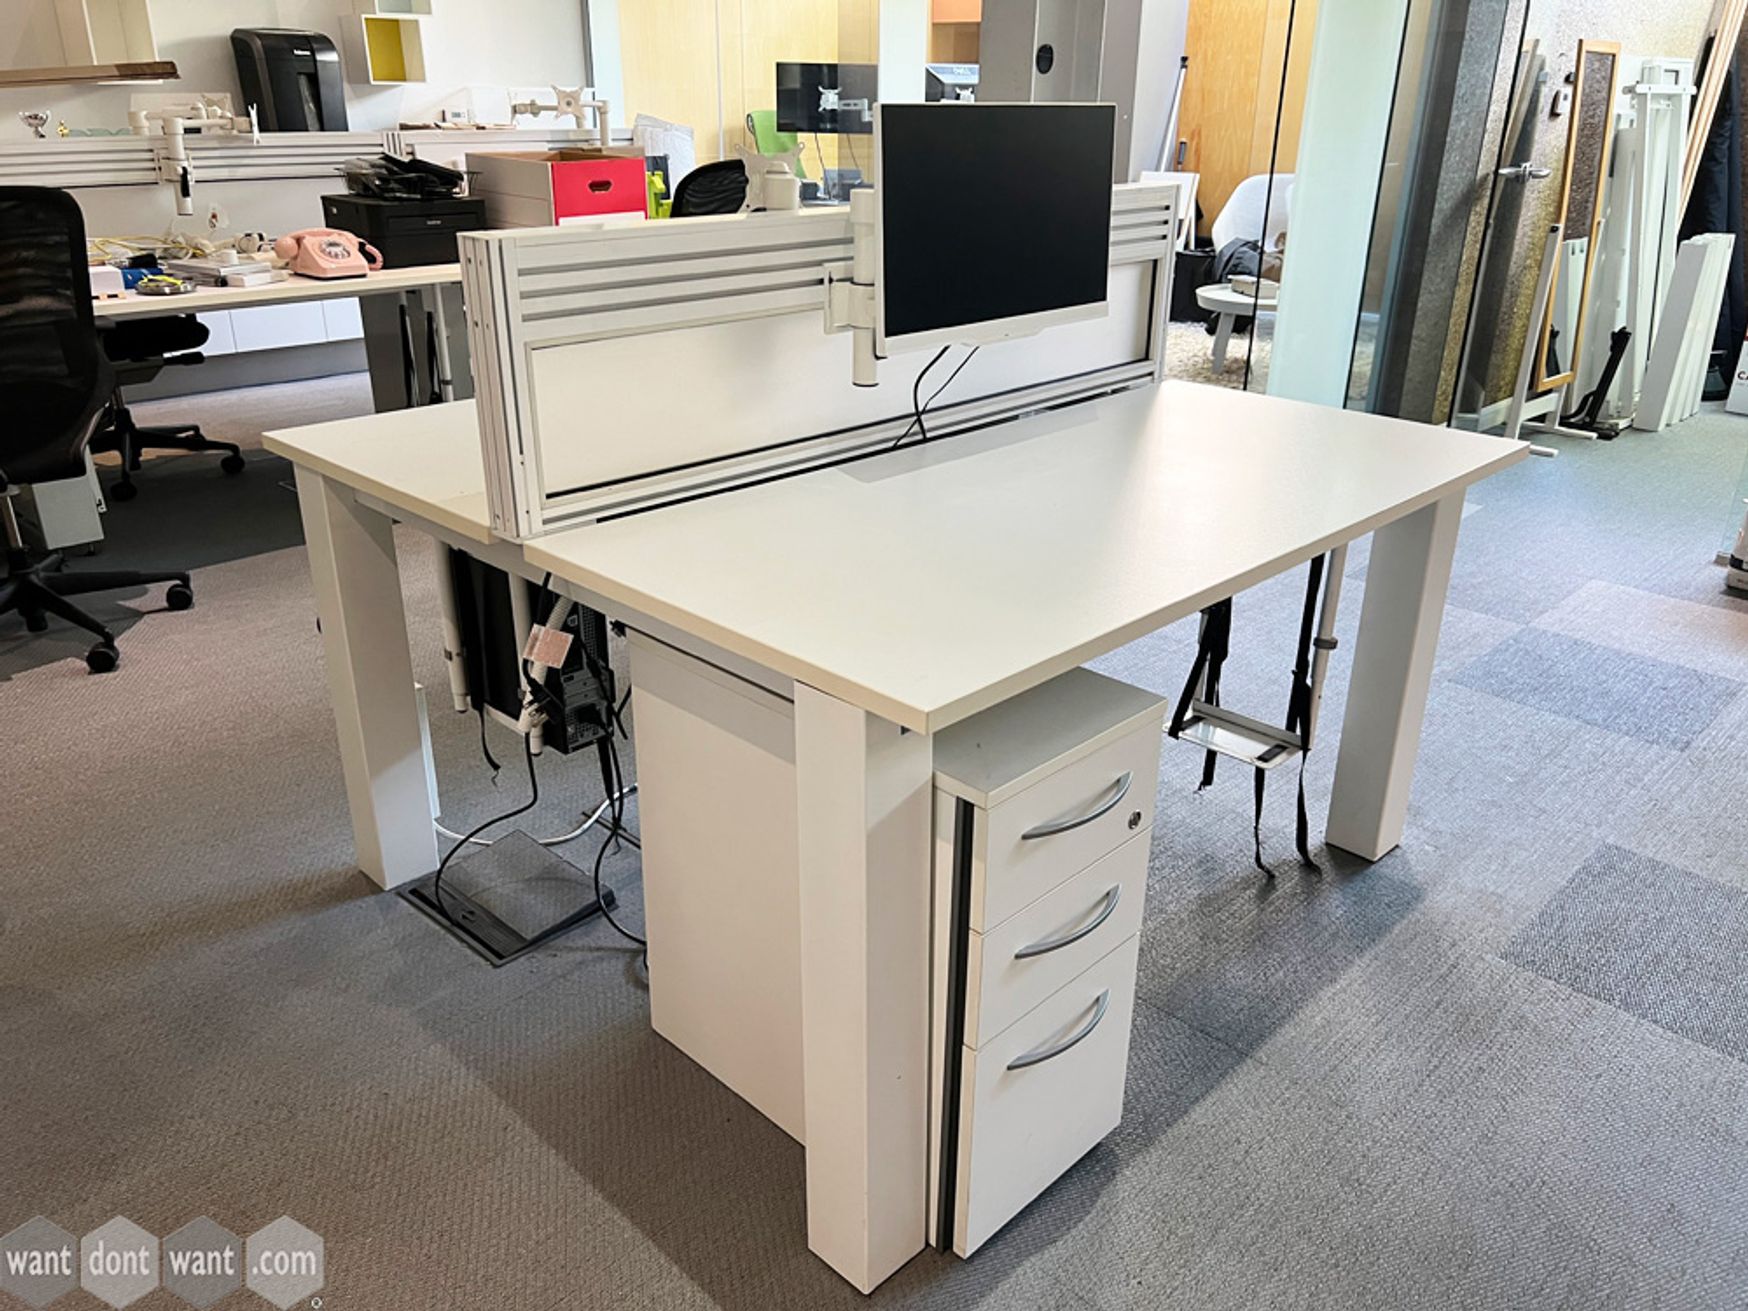 4 x 2-person Sven Christiansen back-to-back white bench desks with screens. 